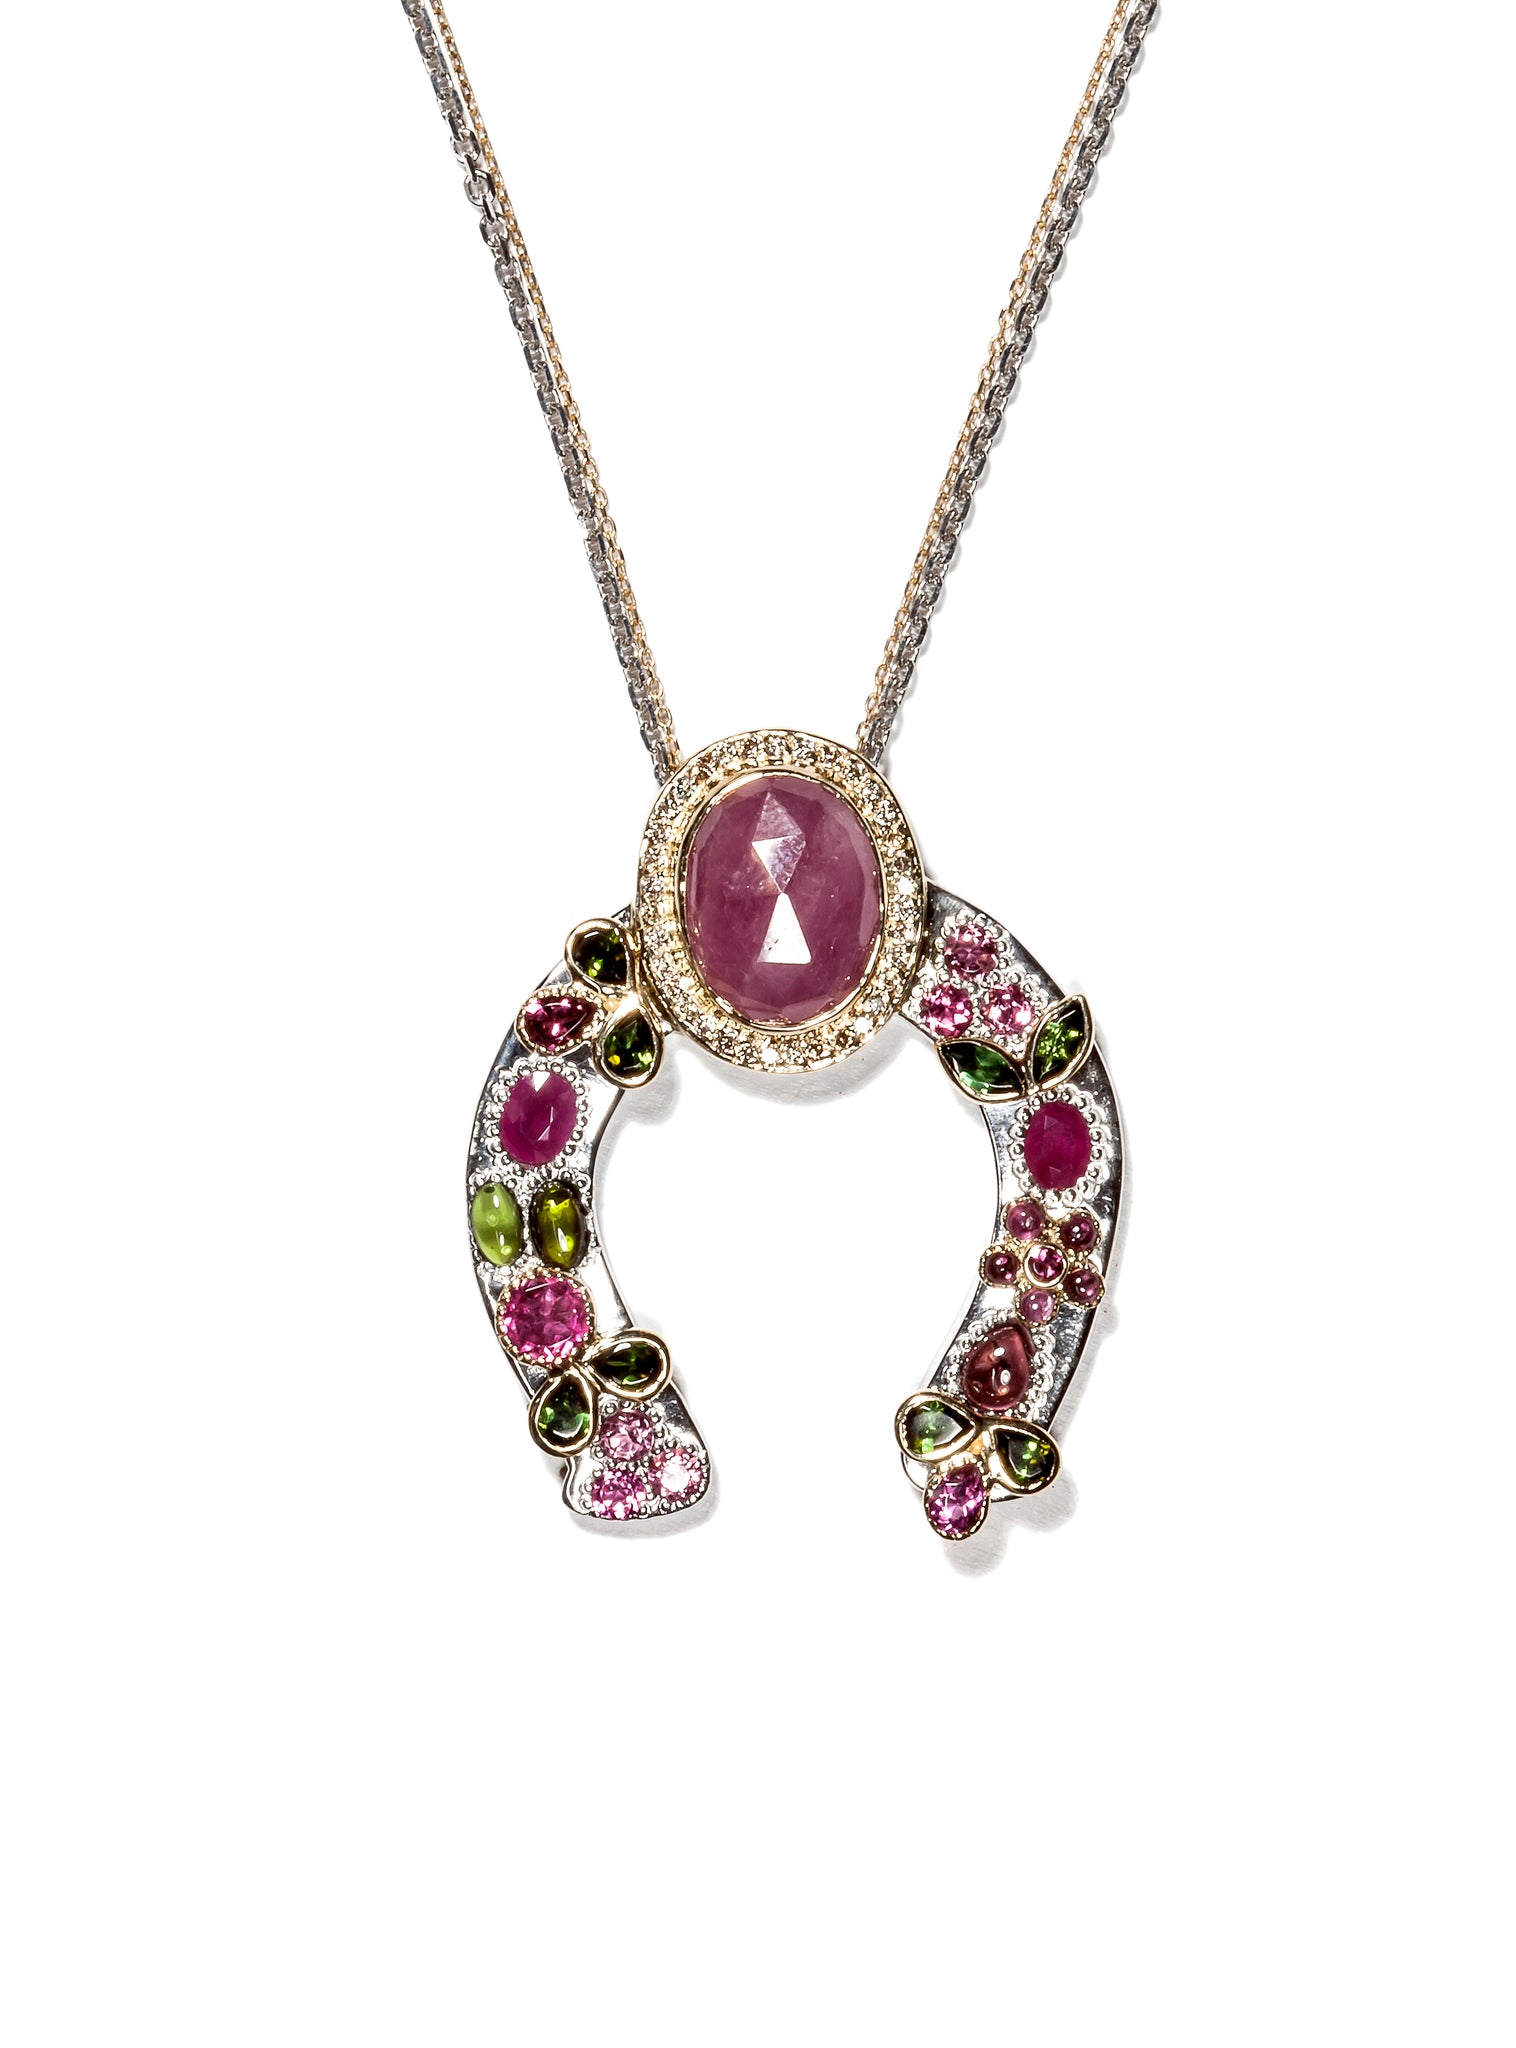 Horseshoe Necklace with Pink Sapphire and Diamond Crown